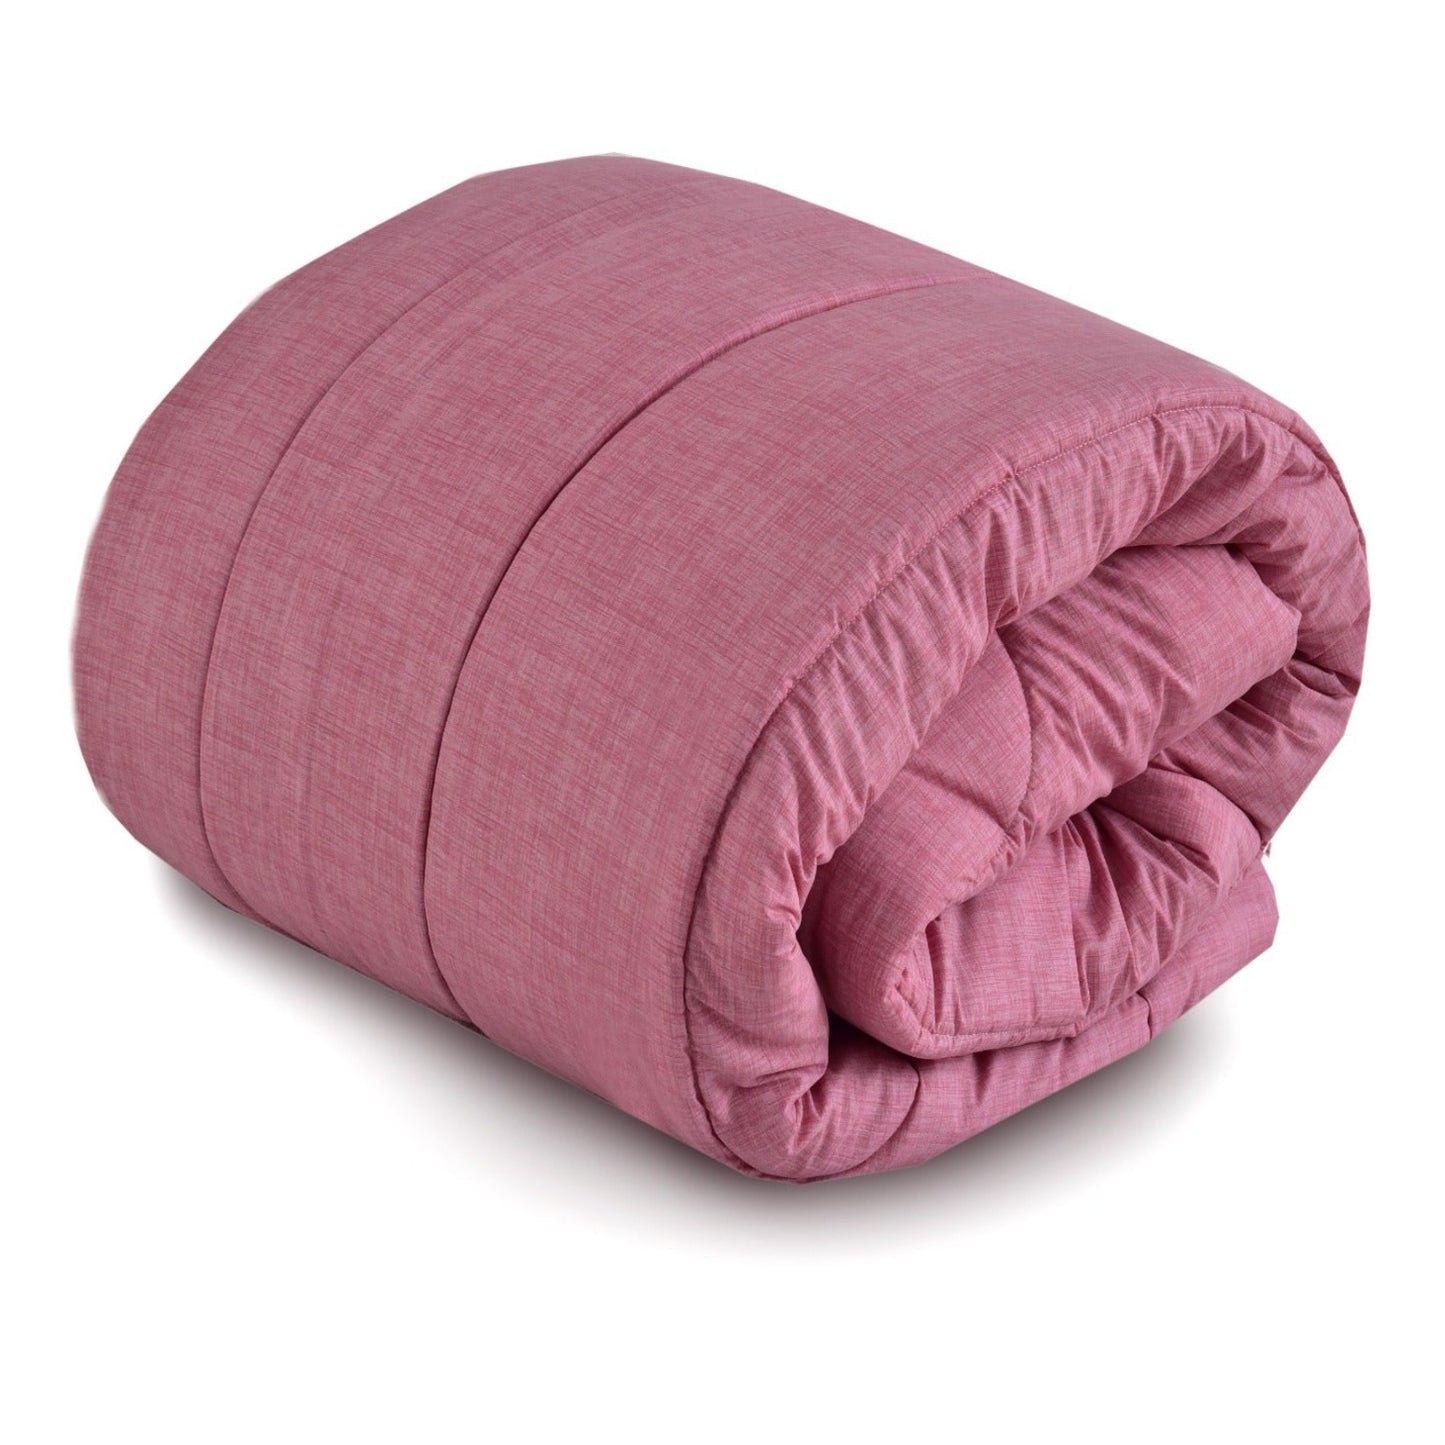 1 PC Double Winter Comforter-Pink Textured Apricot